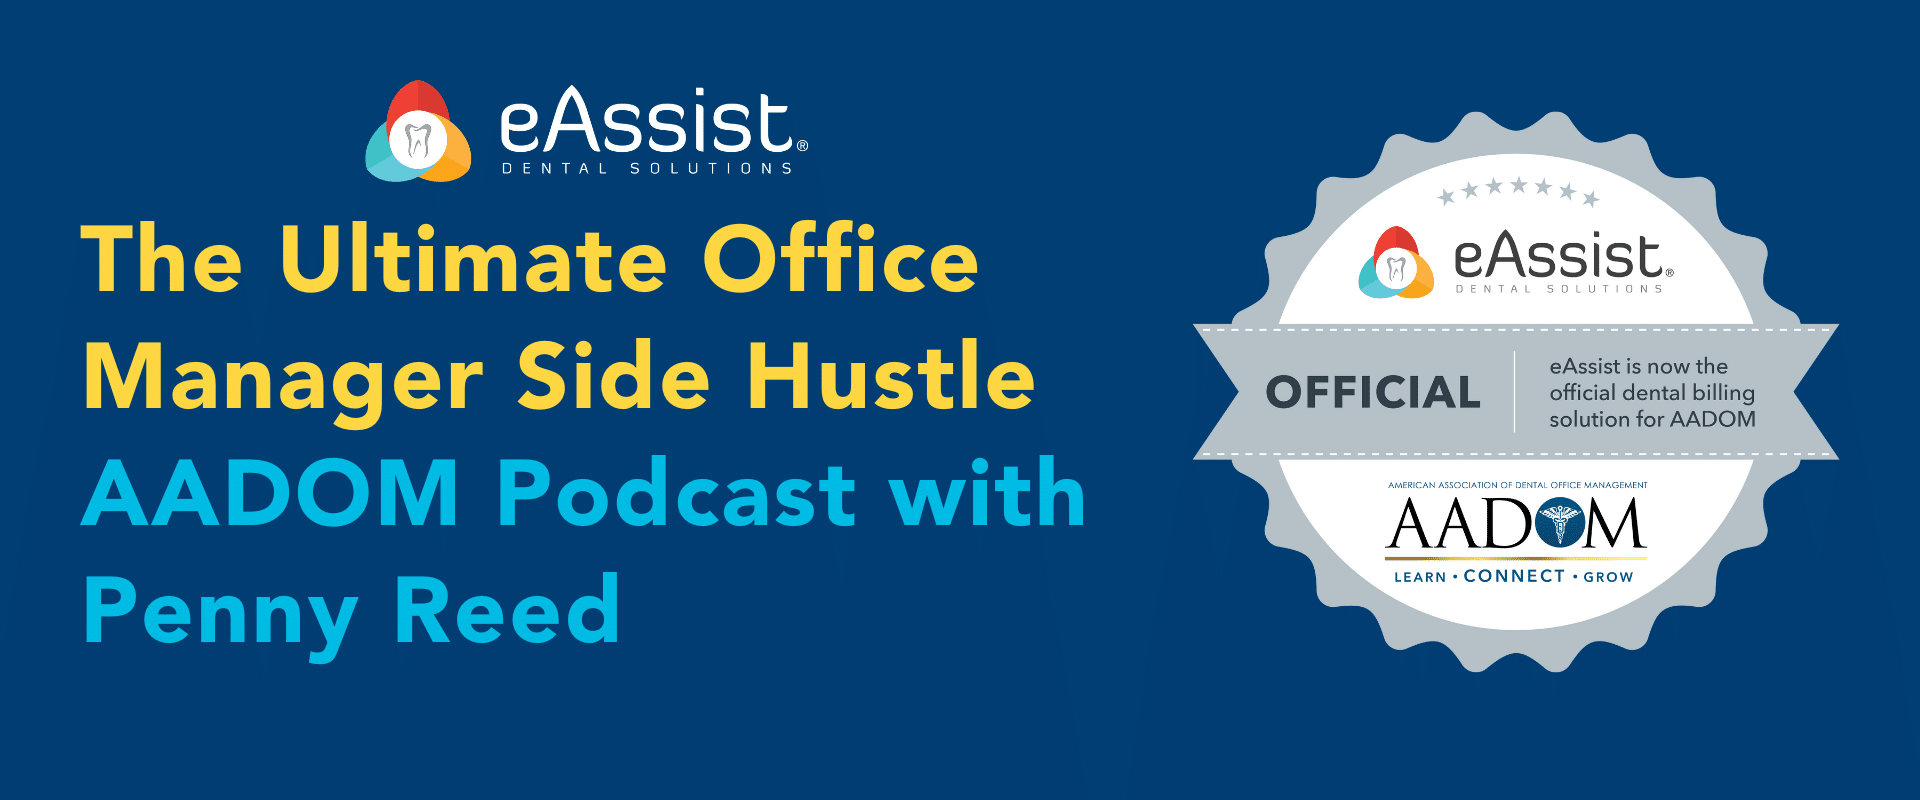 The Ultimate Office Manager Side Hustle